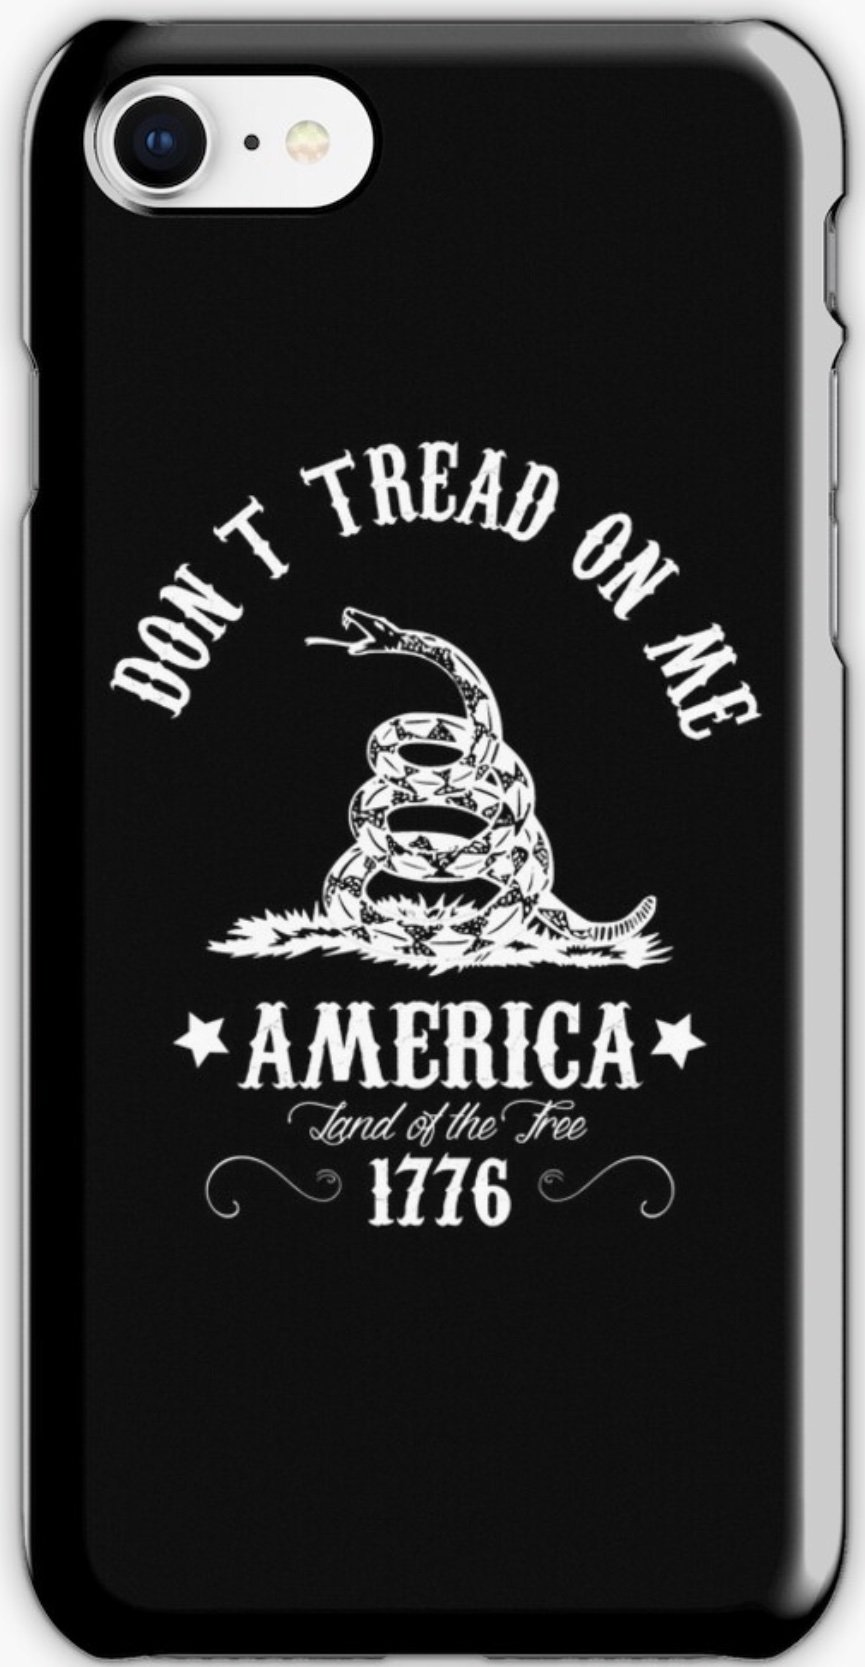 Don't Tread On Me iPhone case